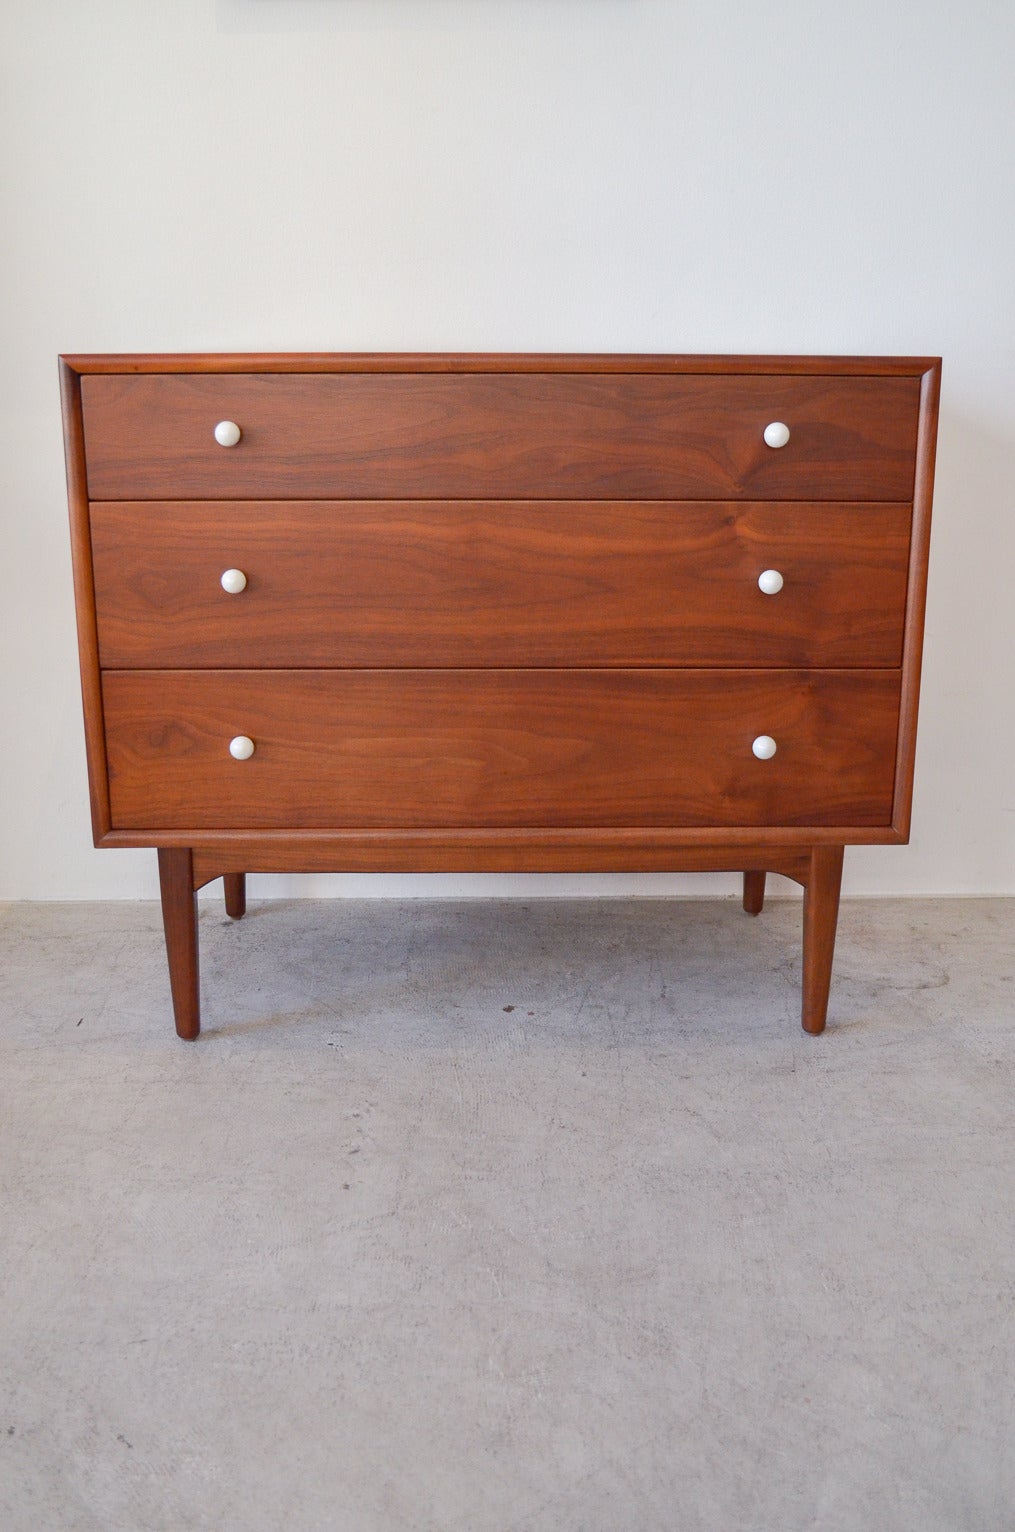 Pair of Kipp Stewart for Drexel Declaration three-drawer dressers or cabinets. Could also be used as bedside tables or nightstands. Both are identical, came from the same estate and have been professionally restored and in showroom perfect